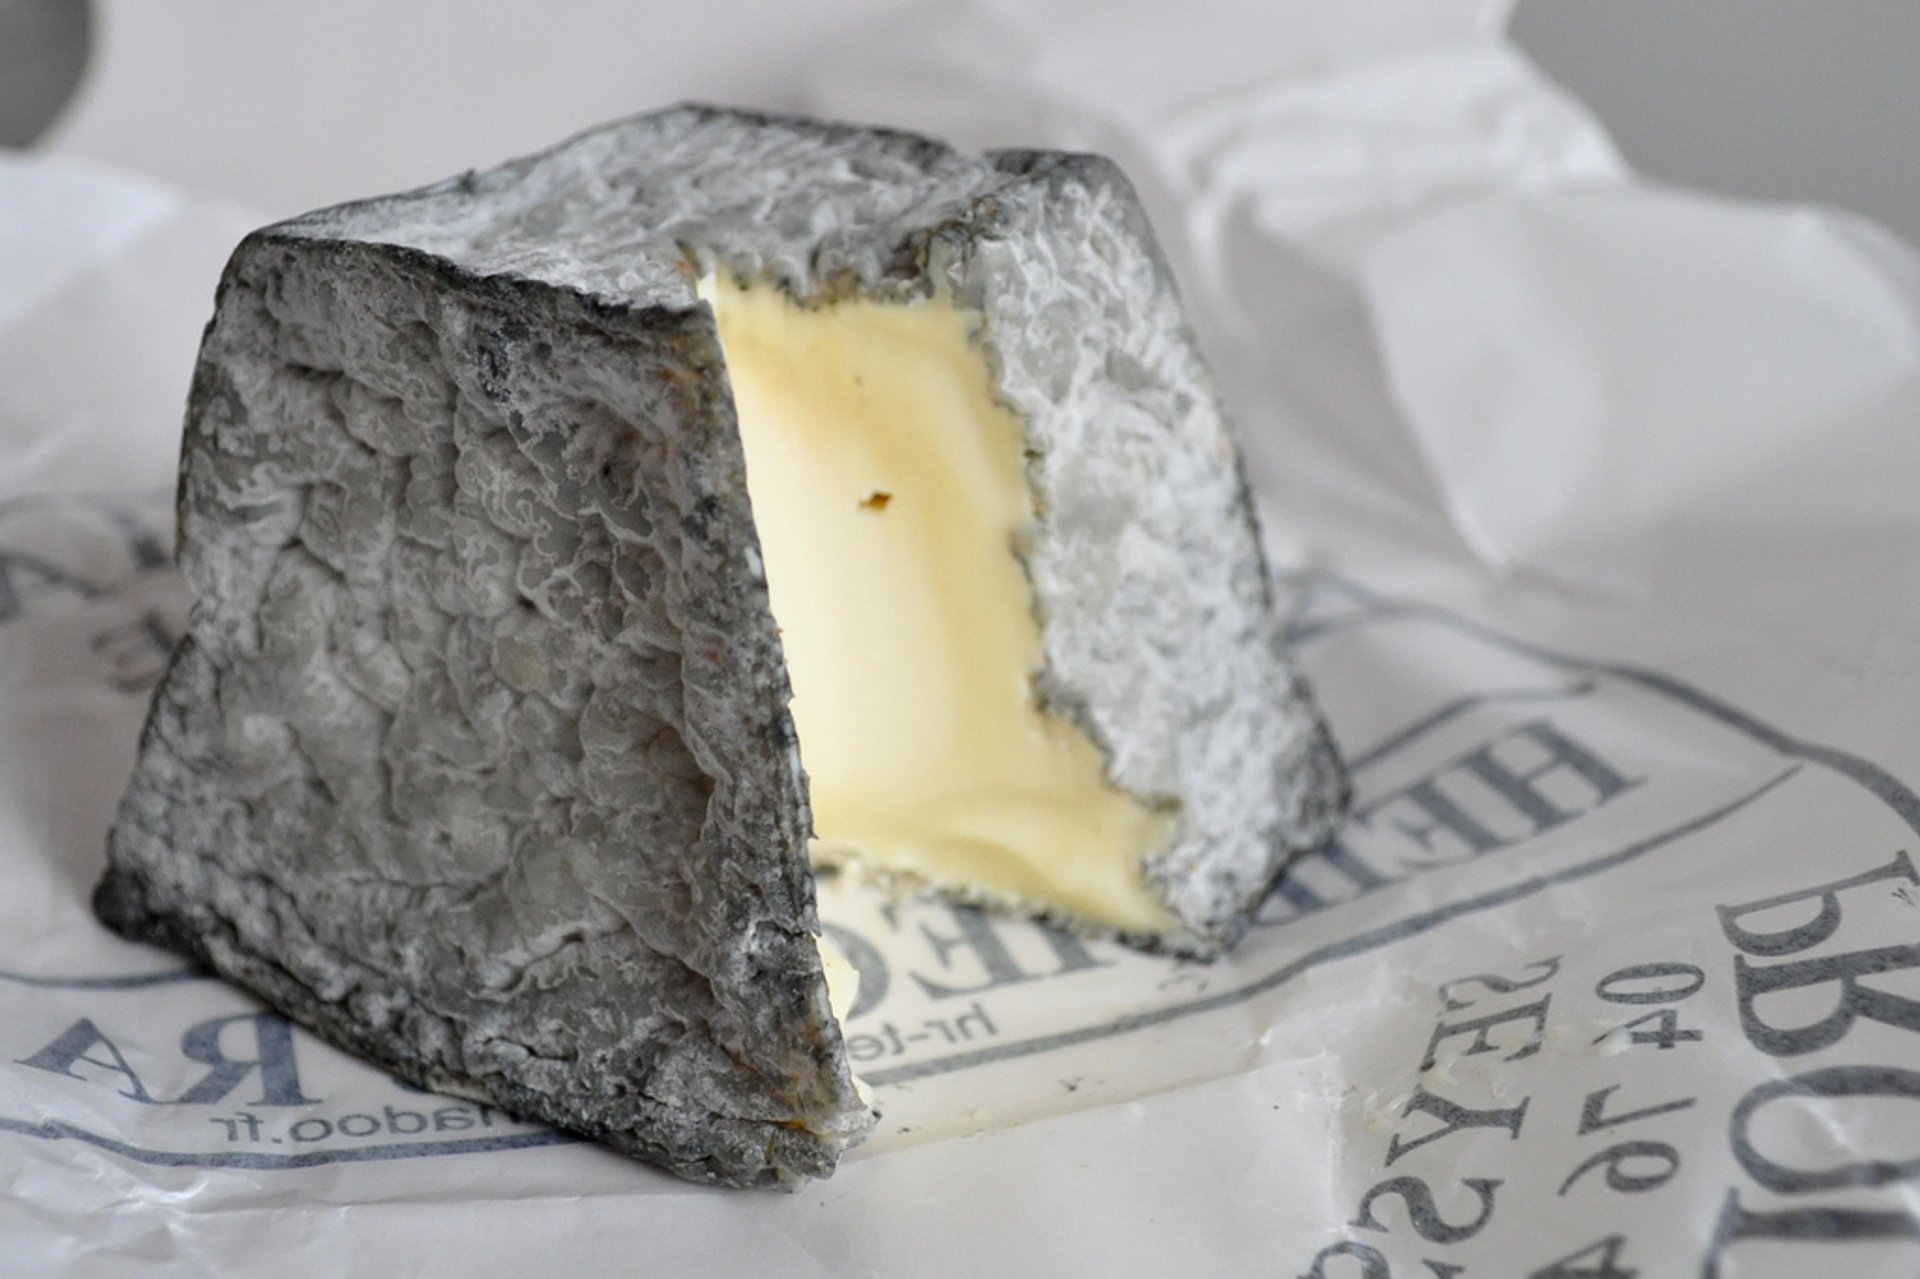 Fromage de Chèvre or Goat Cheese